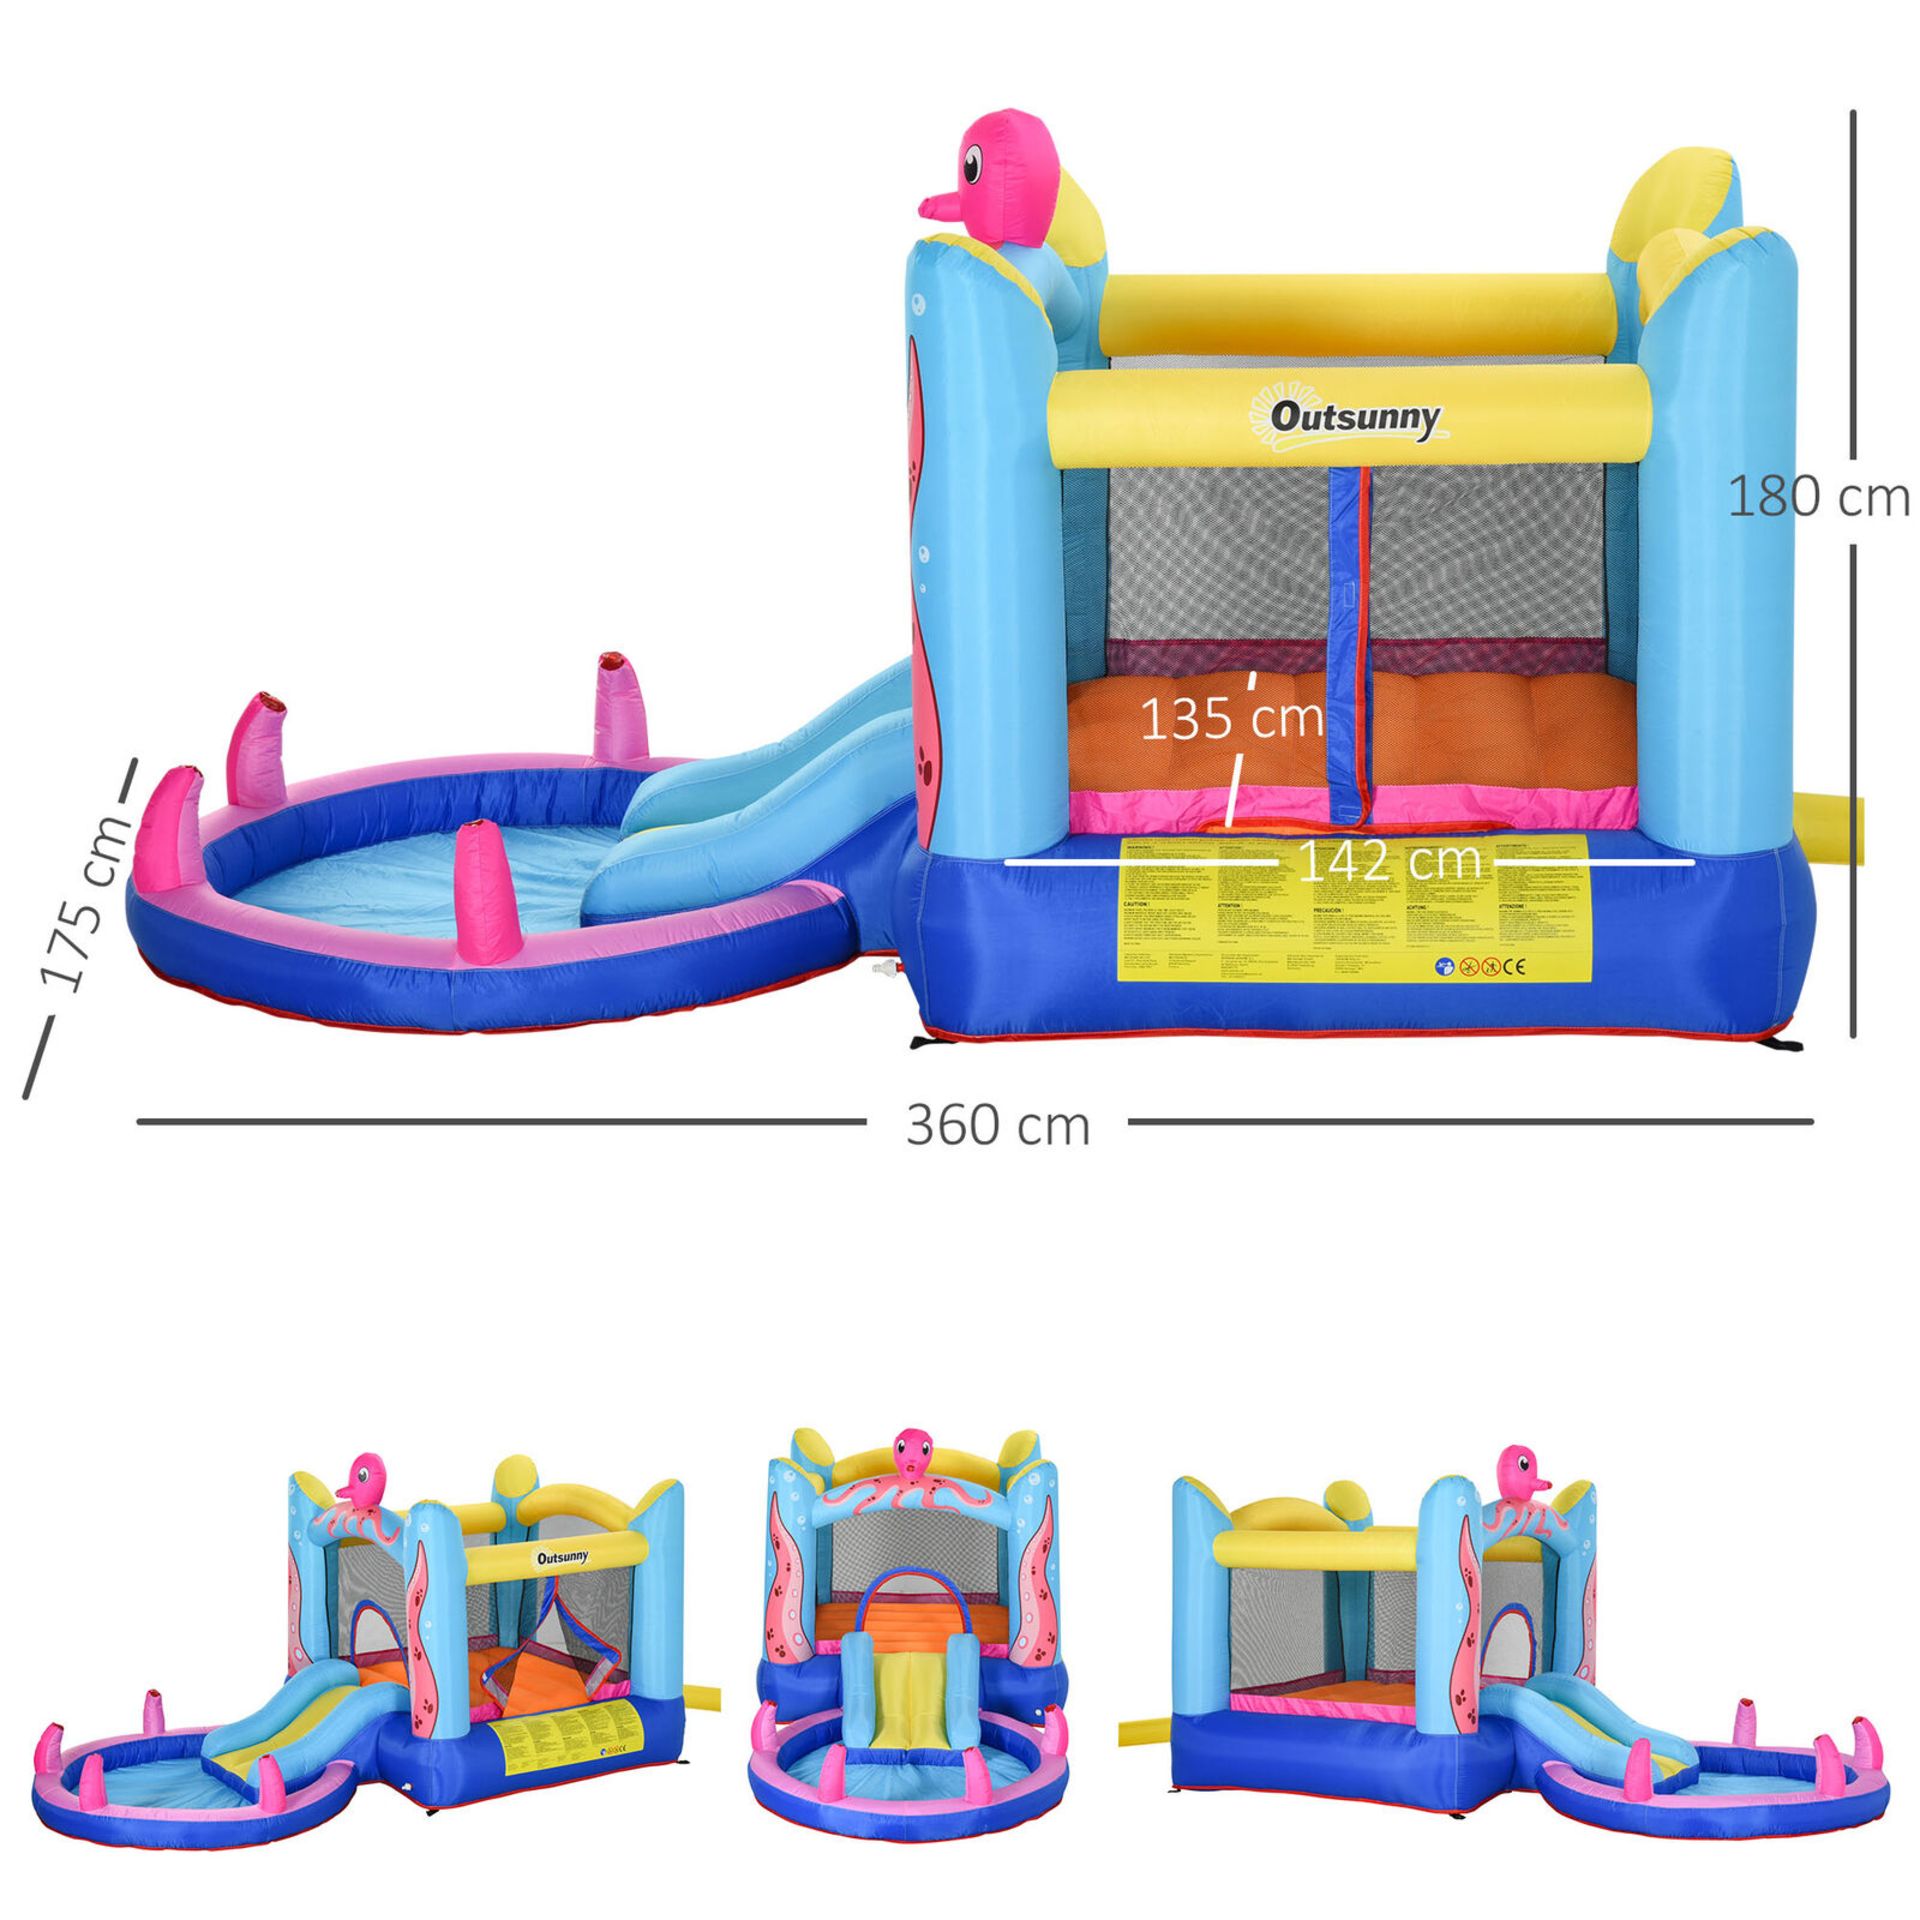 NEW WATER SLIDE BOUNCY CASTLE WITH POOL INCLUDES CARRYBAG AND BLOWER - Image 4 of 5